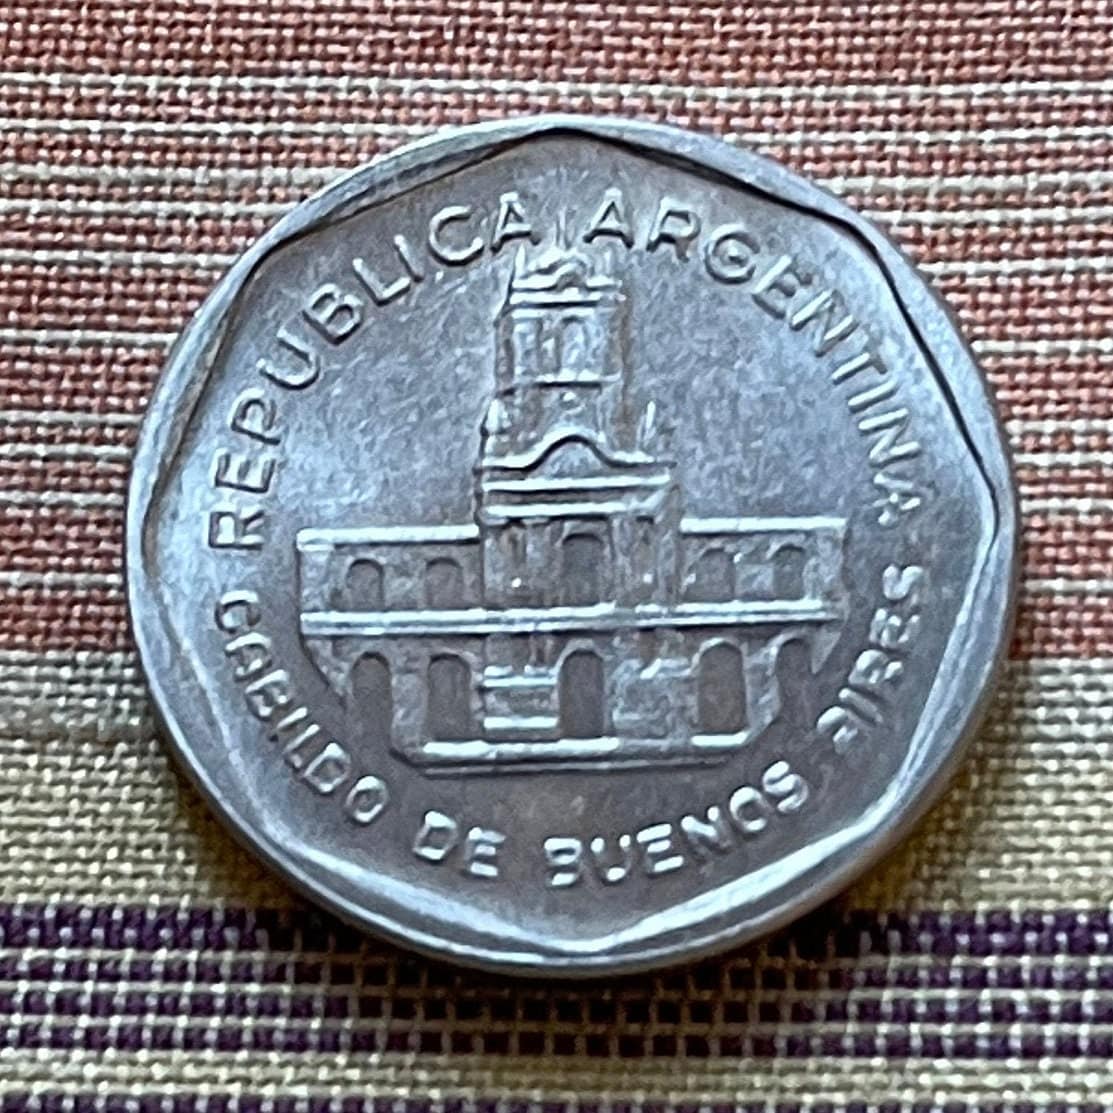 Buenos Aires City Hall 1 Austral Argentina Authentic Coin for Jewelry and Craft Making 1989